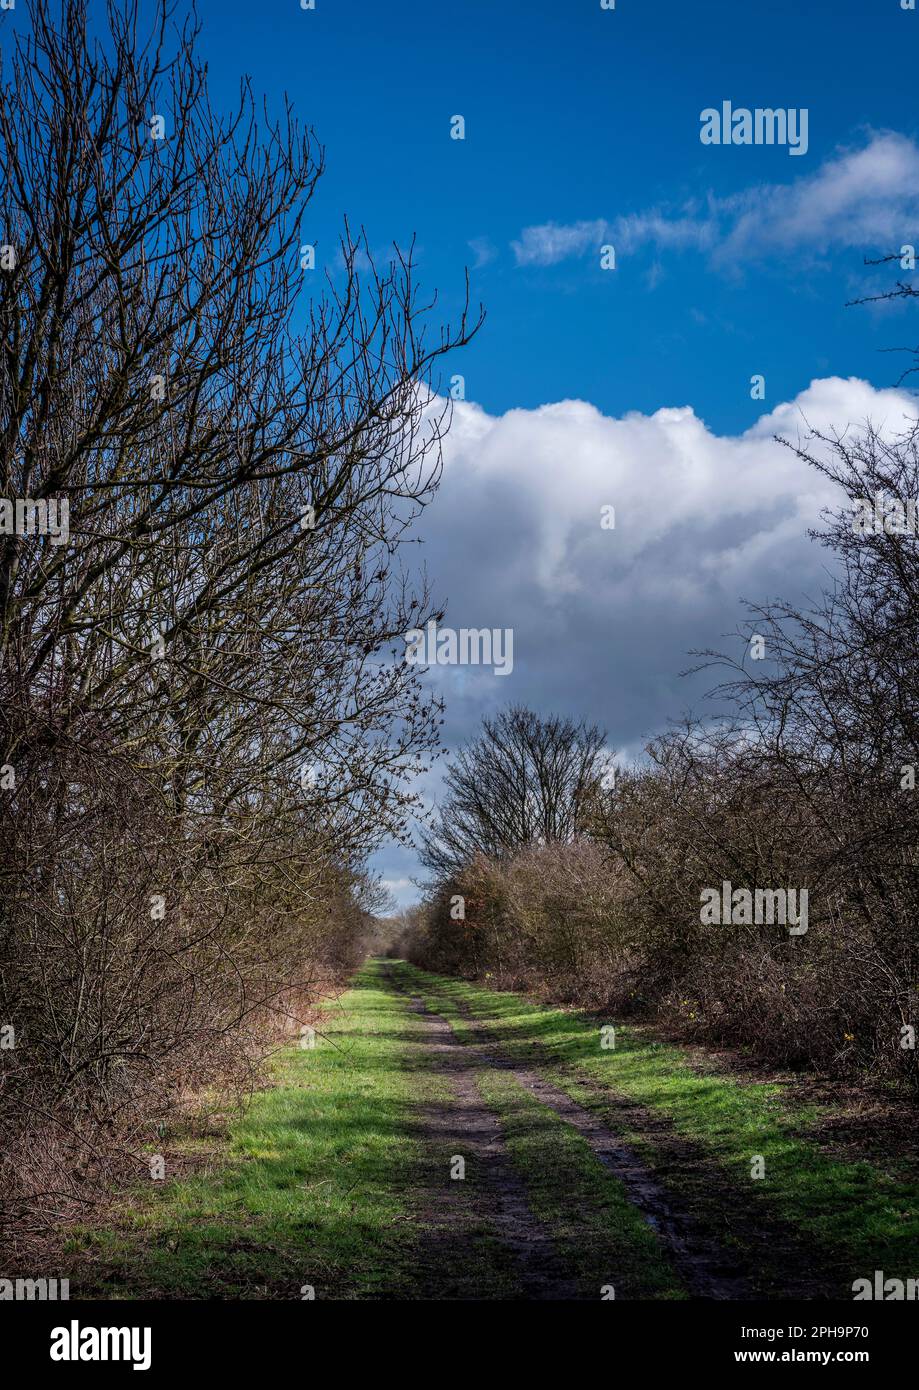 The Hudson Way walking, cycling and horse bridleway along the old Beverley to York railway track near Cherry Burton in East Yorkshire, UK Stock Photo